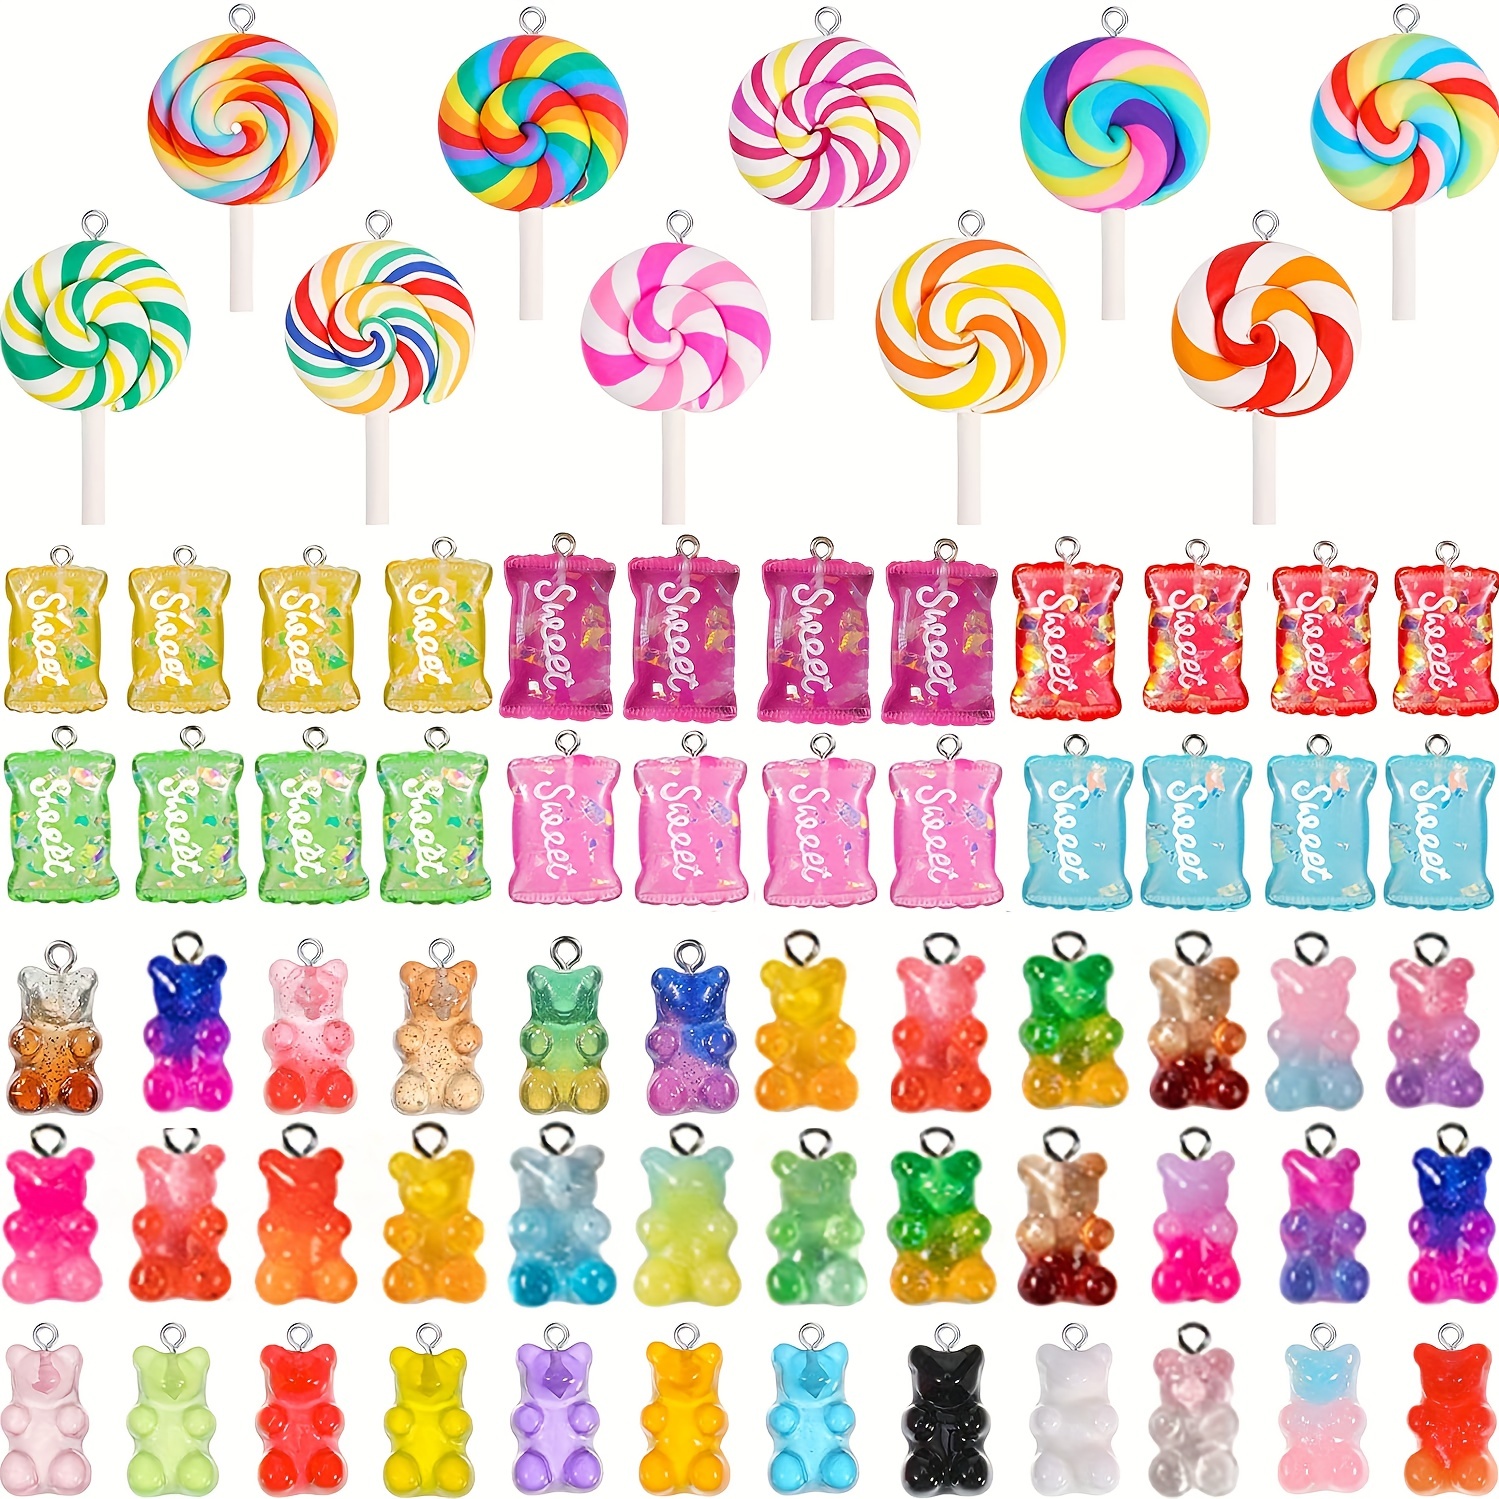 JINDUODUO 180 Pieces Charms Cute Set, Kawaii Charms Bulk for Assorted Candy  Sweets Flatback Resin for DIY Craft Making and Ornament Scrapbooking (Pink